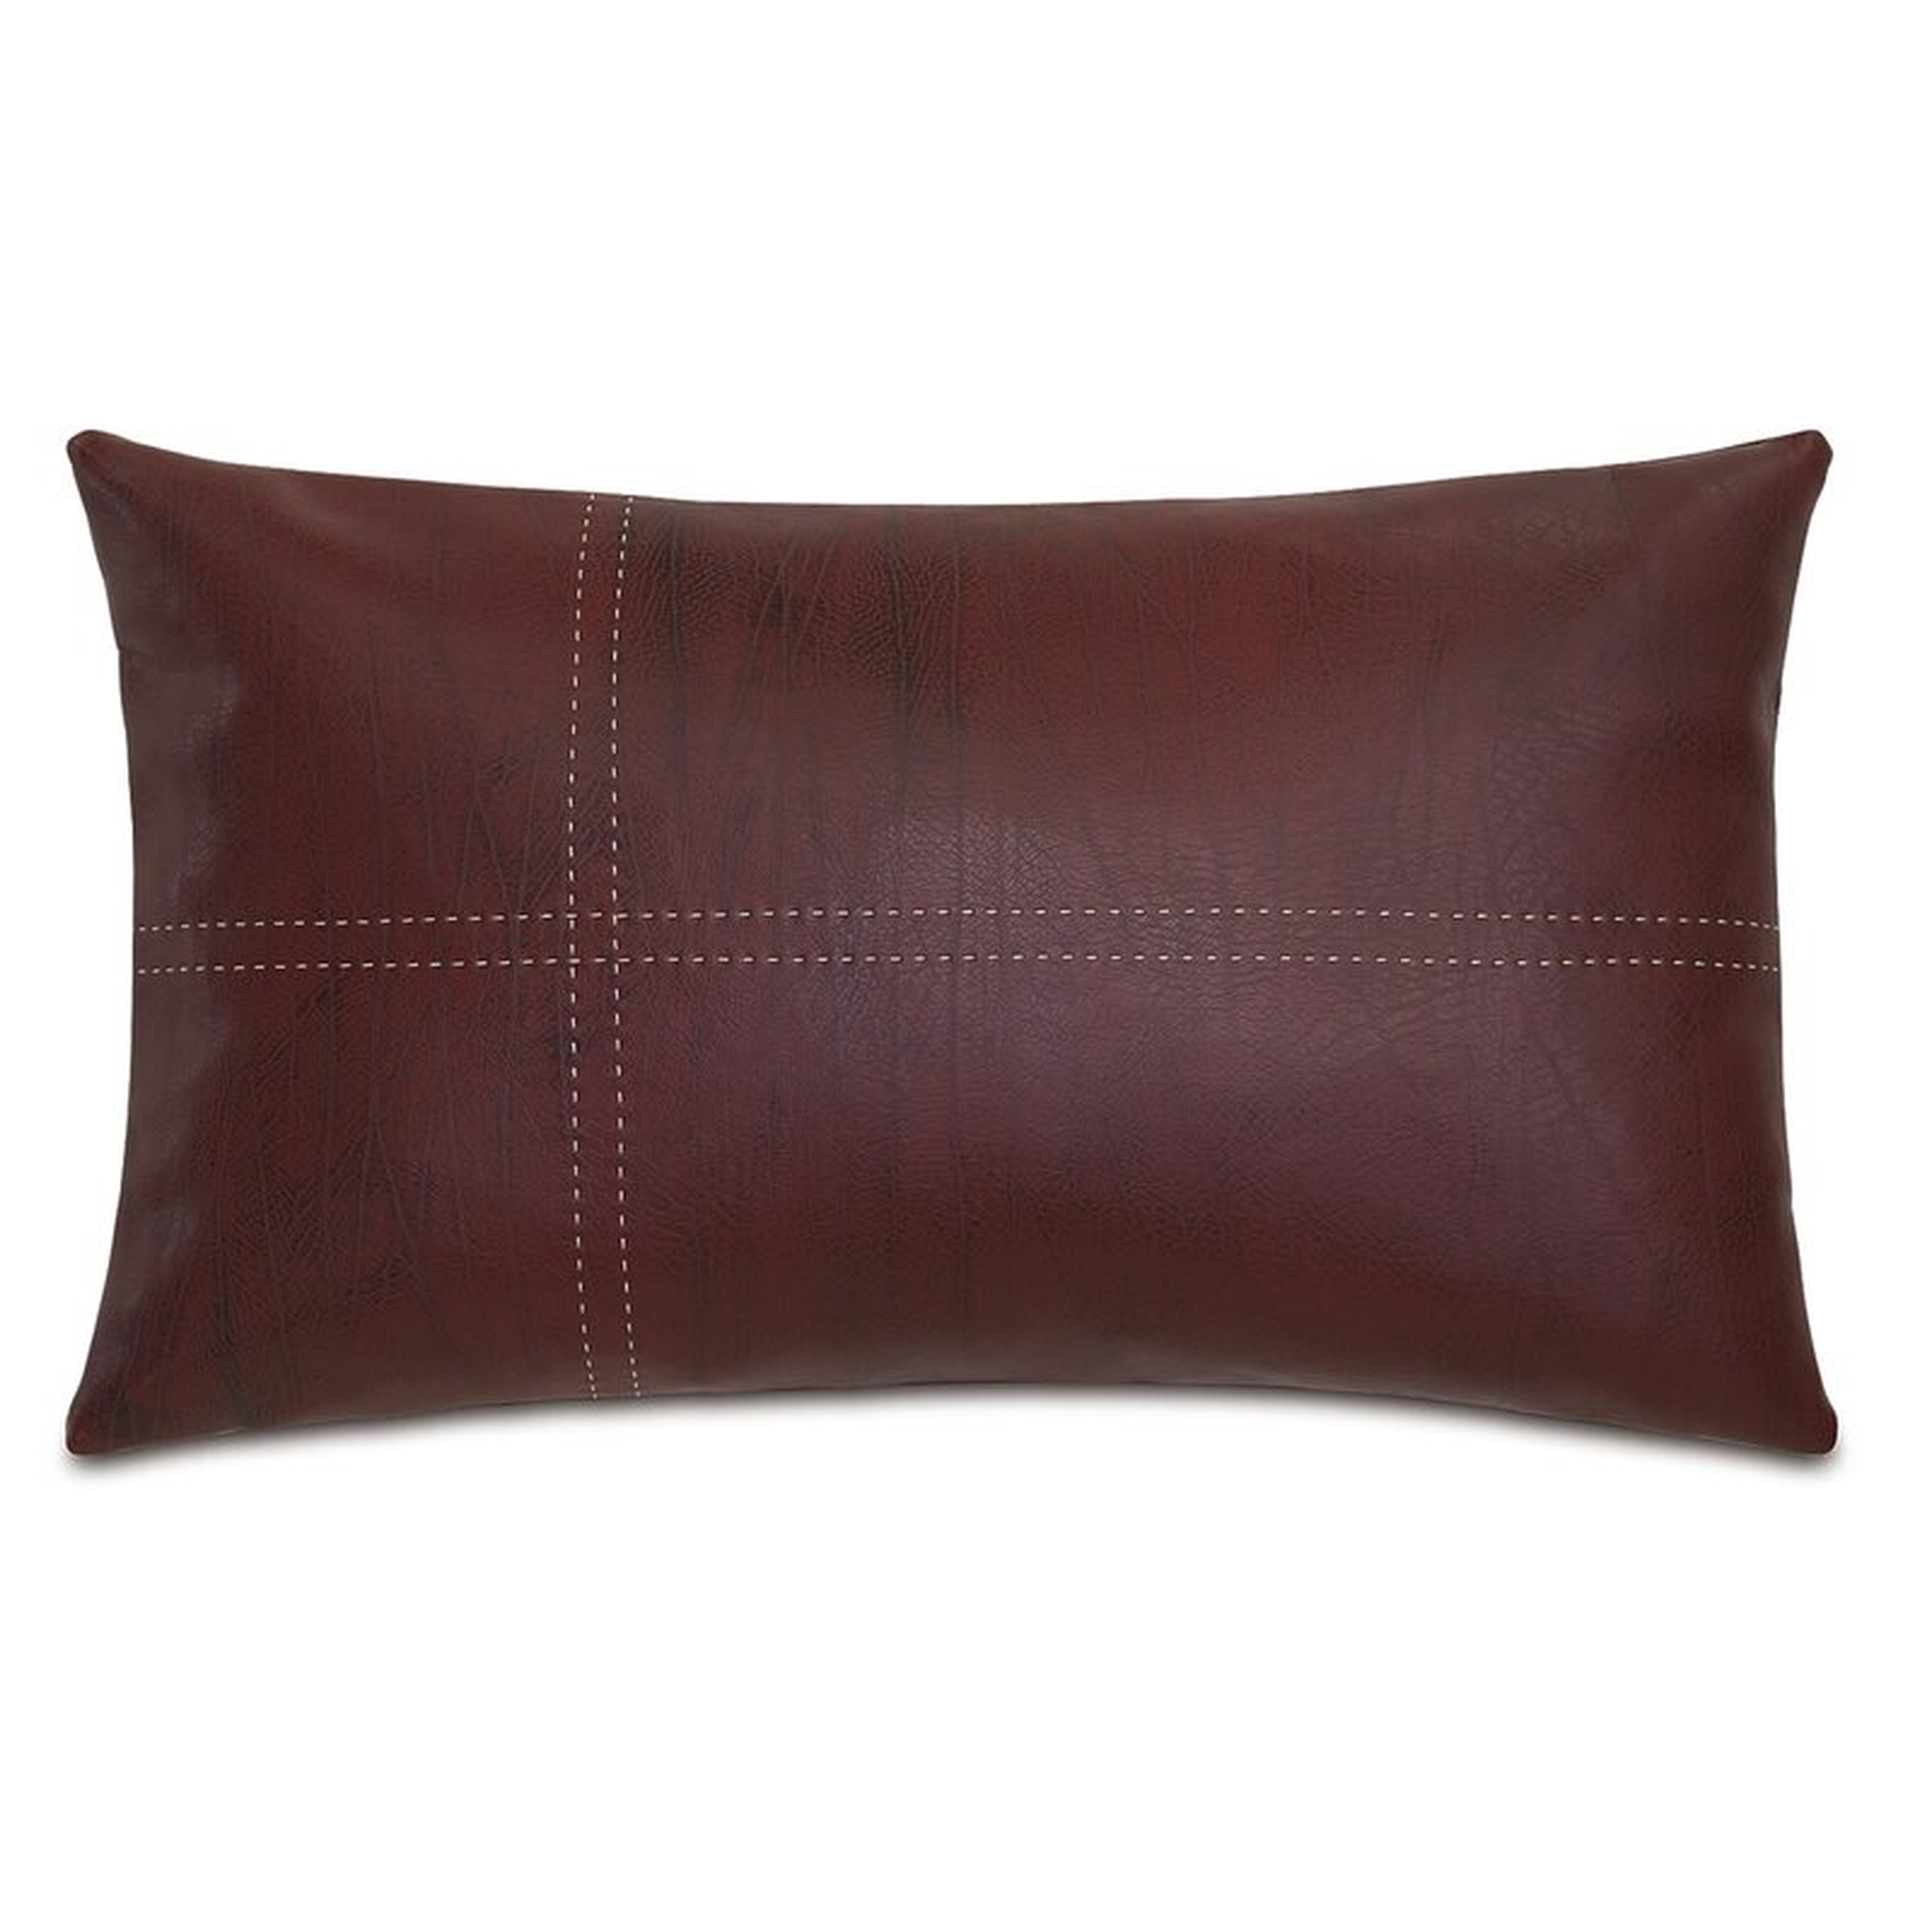 Eastern Accents Theo Faux Leather Lumbar Pillow - Perigold